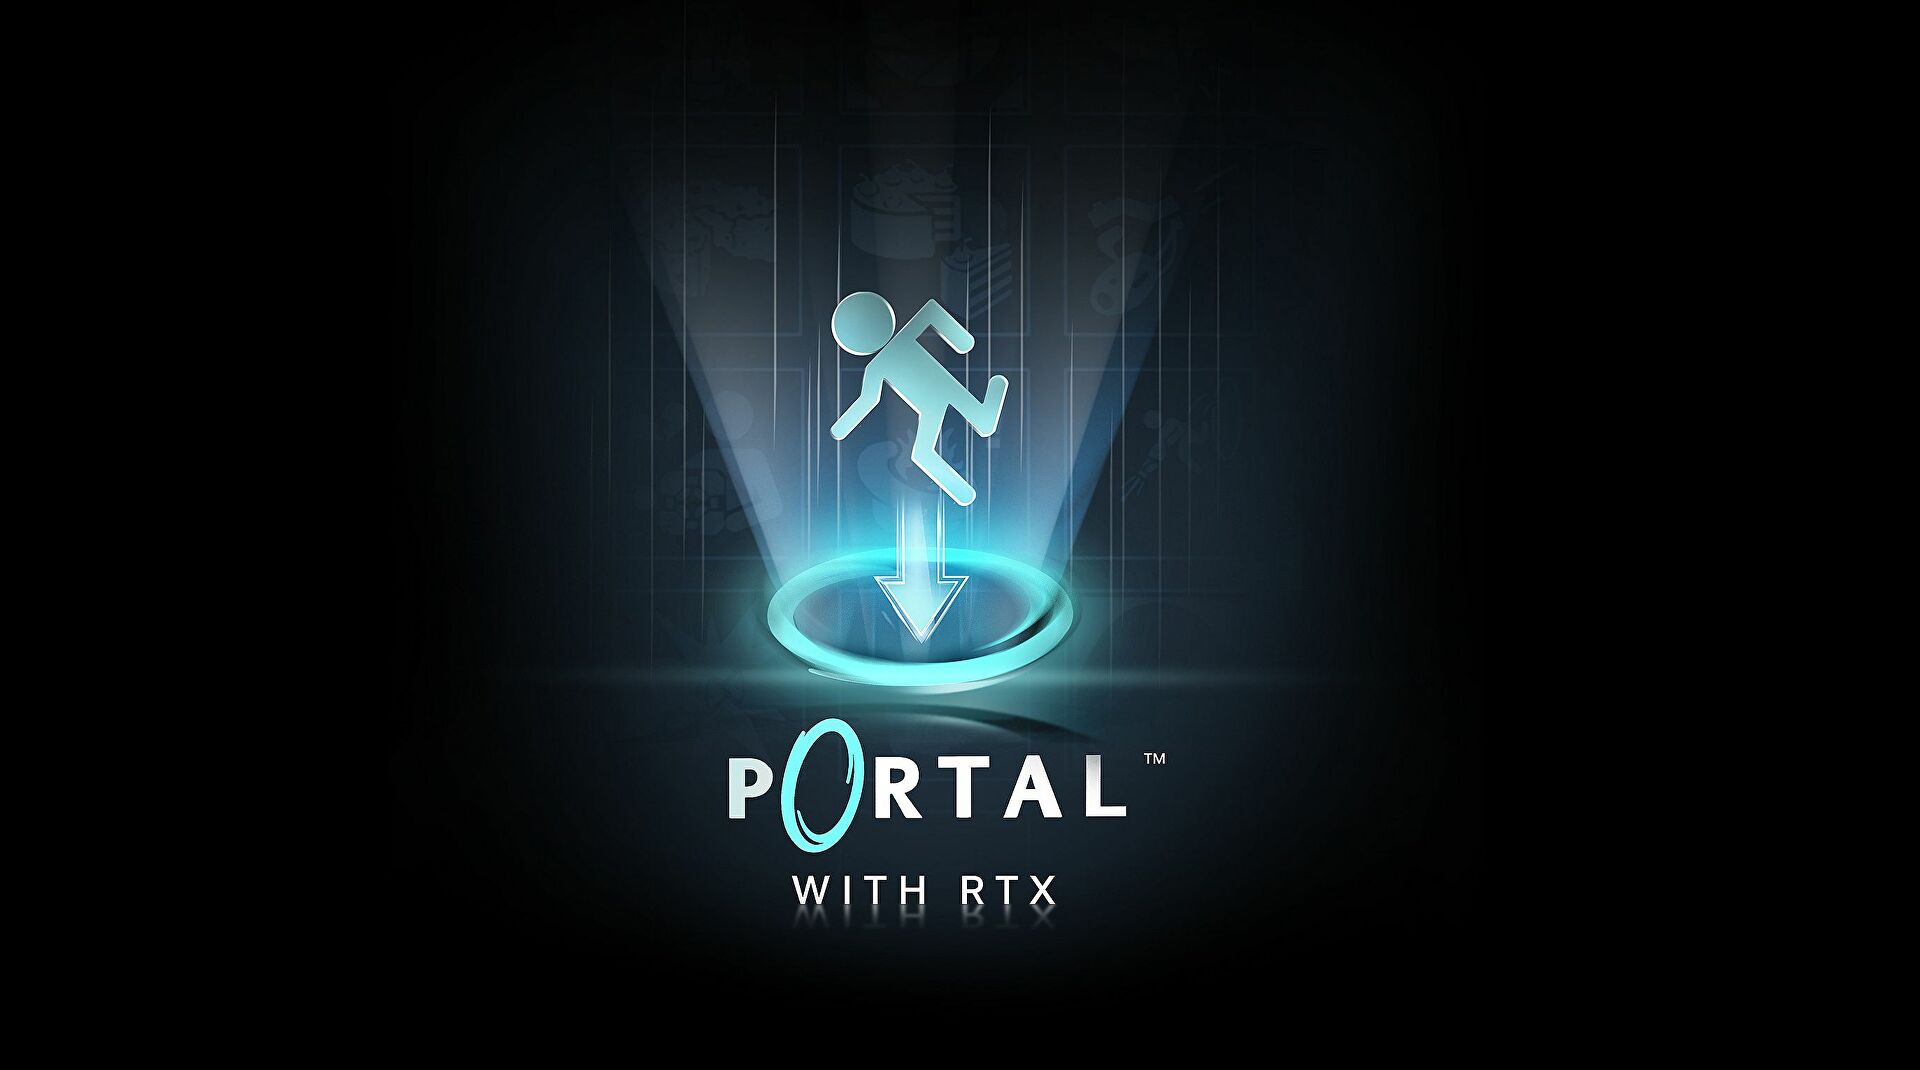 Nvidia’s Portal with RTX hits December 8, expect advanced graphics features such as DLSS 3, and more